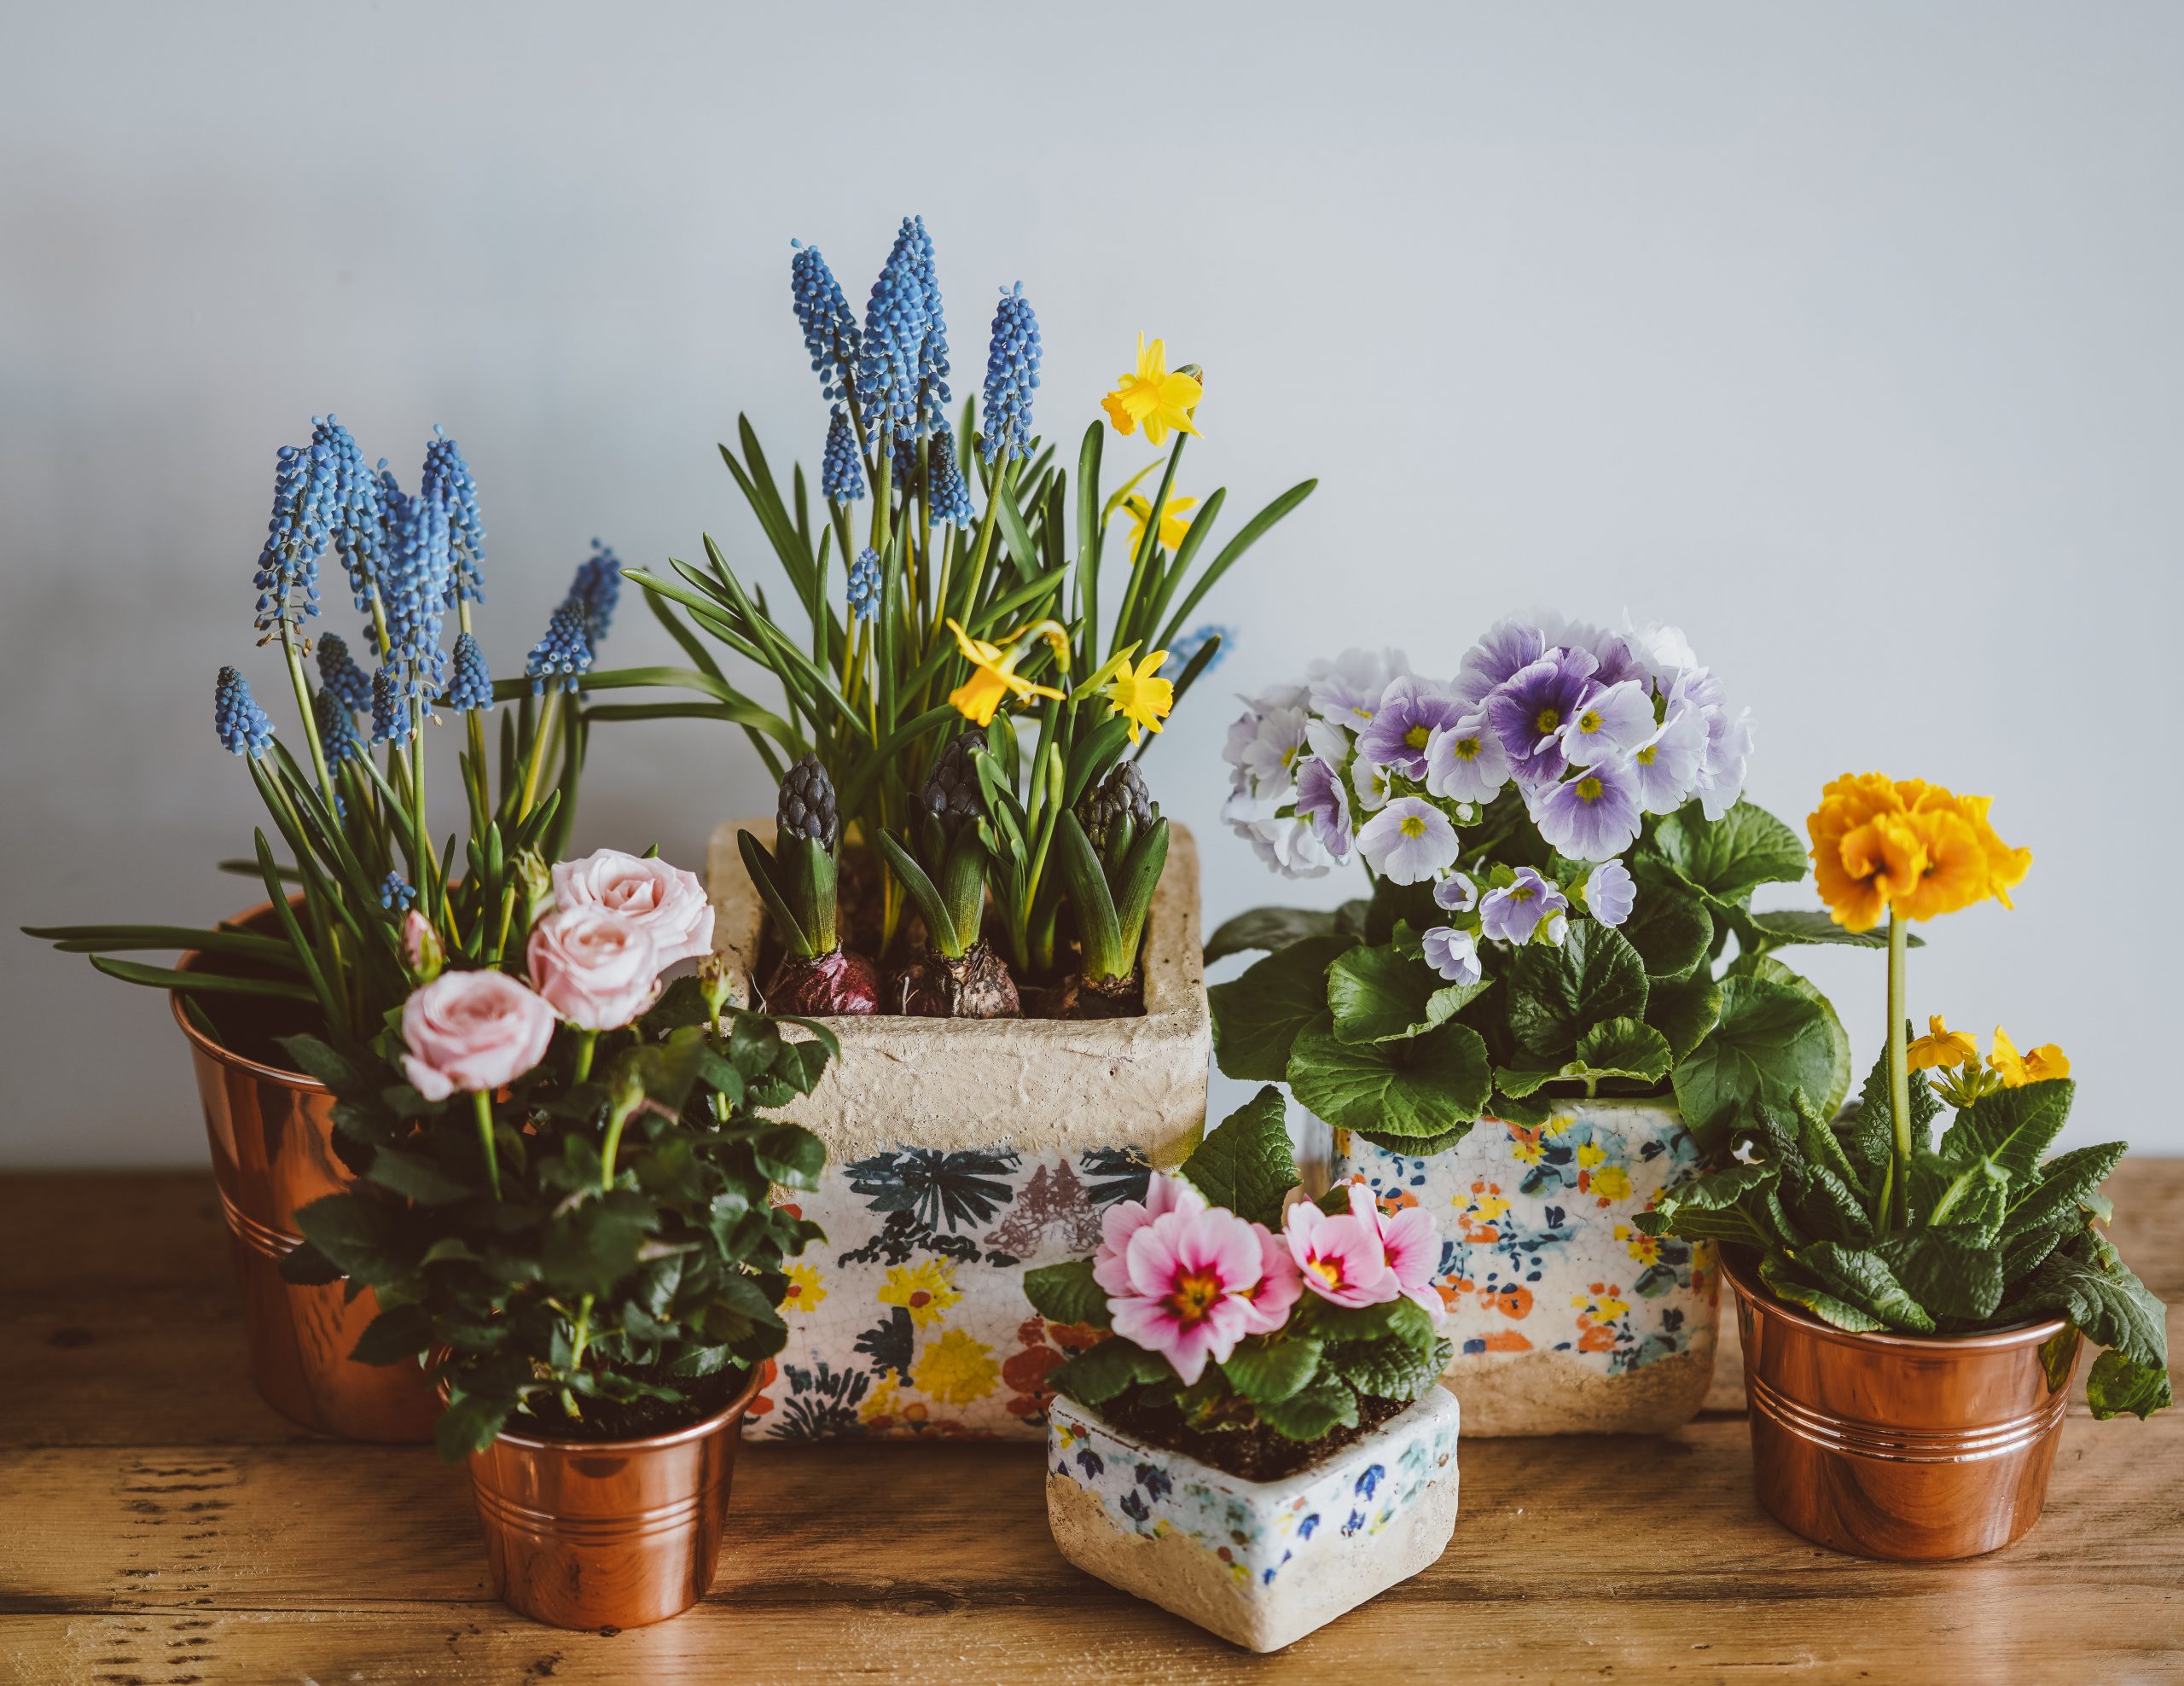 Pots of bright spring flowers